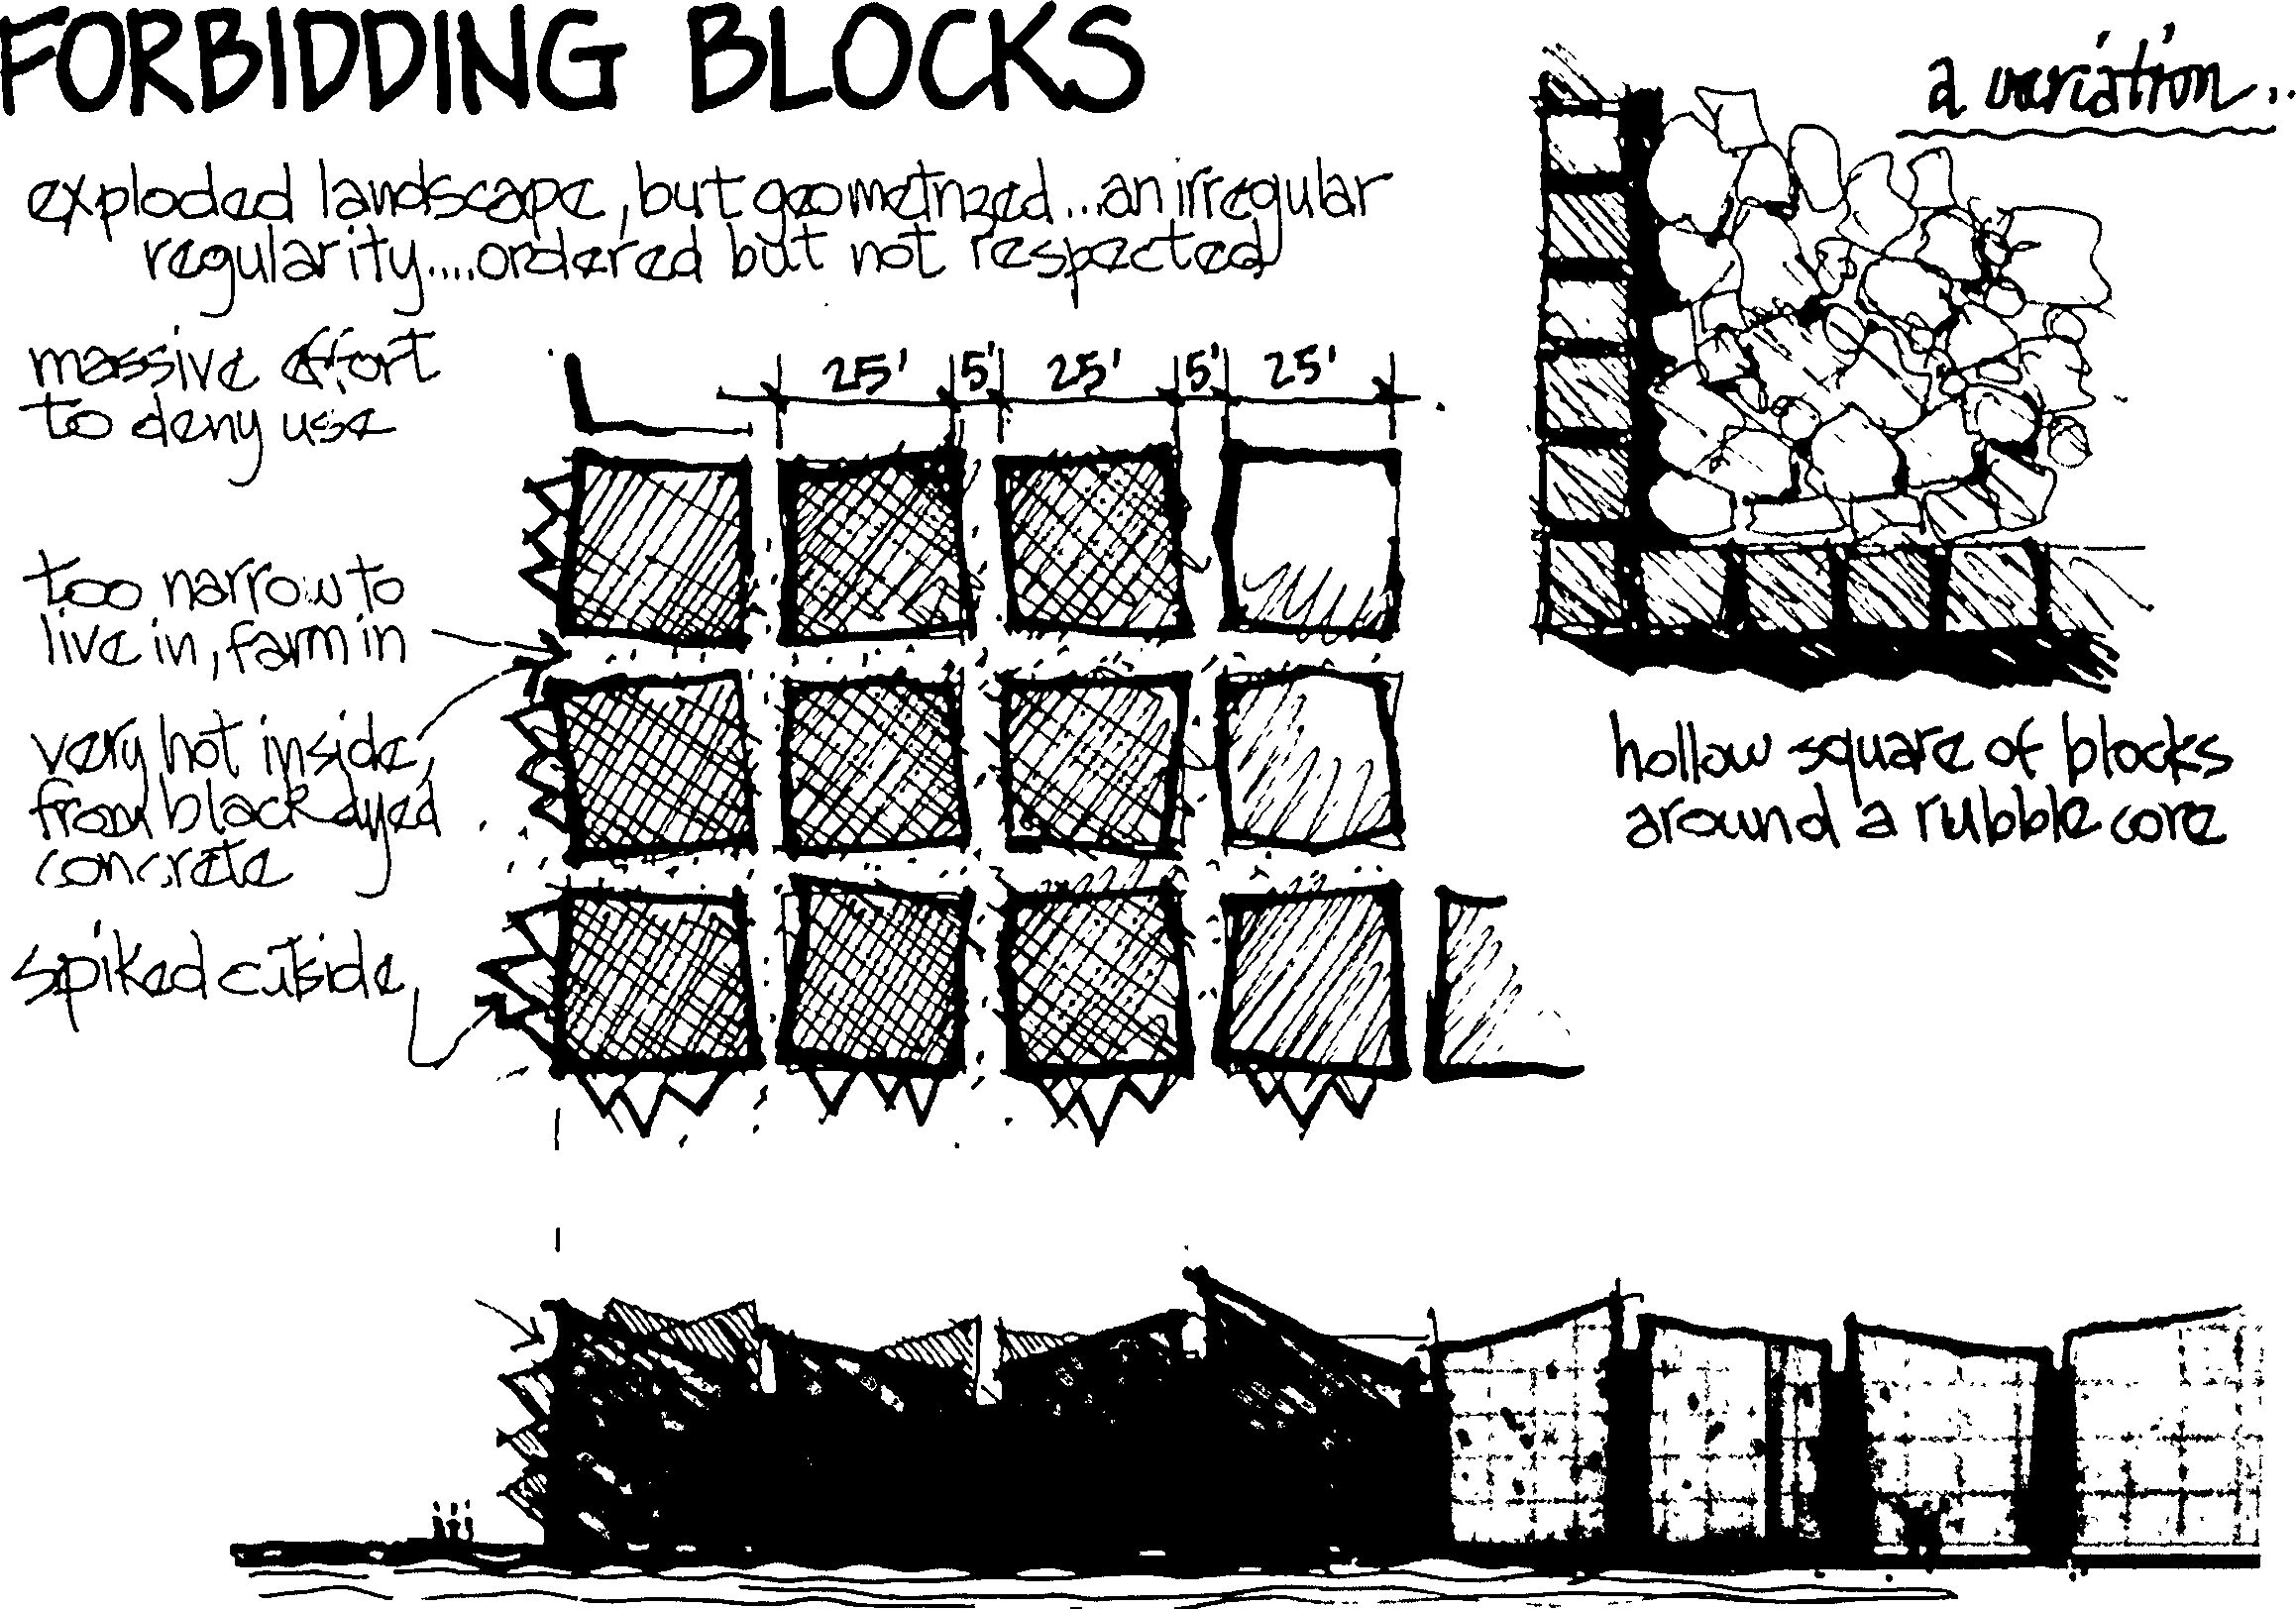 Sketch showing an overhead view of a grid of slightly irregular blocks, with a narrow walkway between each. The outer-facing edges of the blocks have protruding spikes. The blocks can also act as an enclosing wall for a rubble landscape.